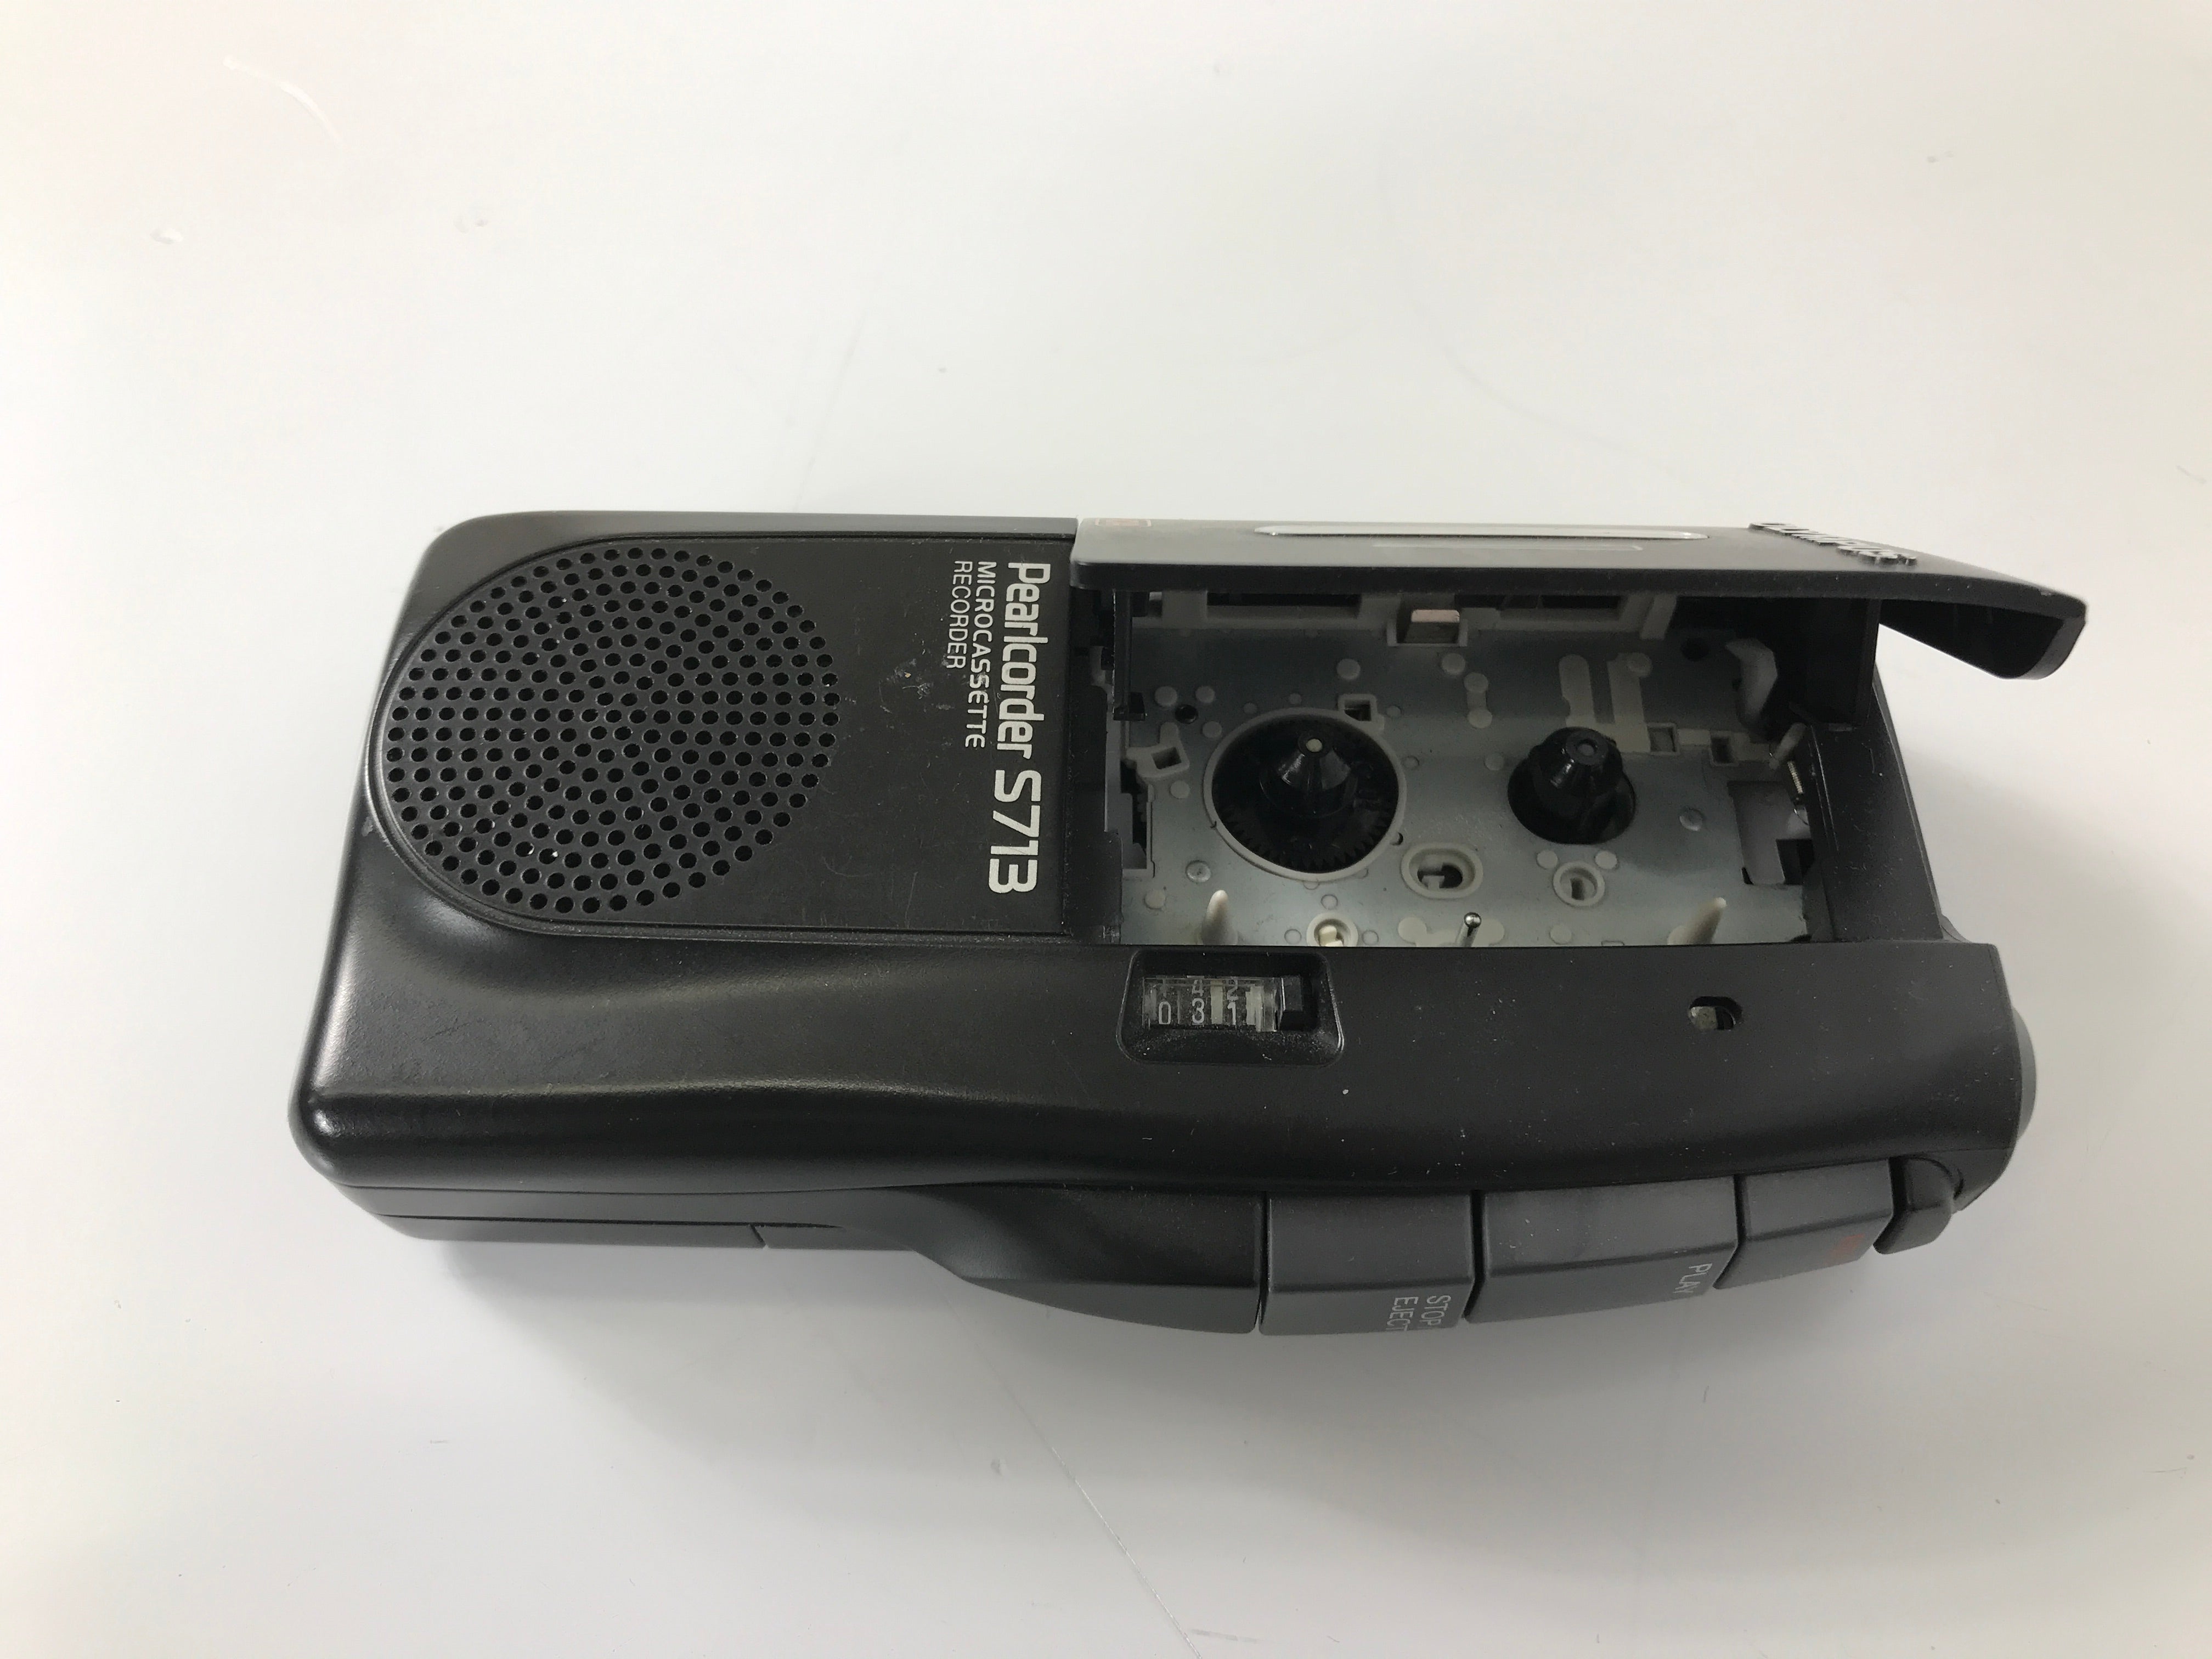 Olympus Pearlcorder S713 Microcassette Recorder